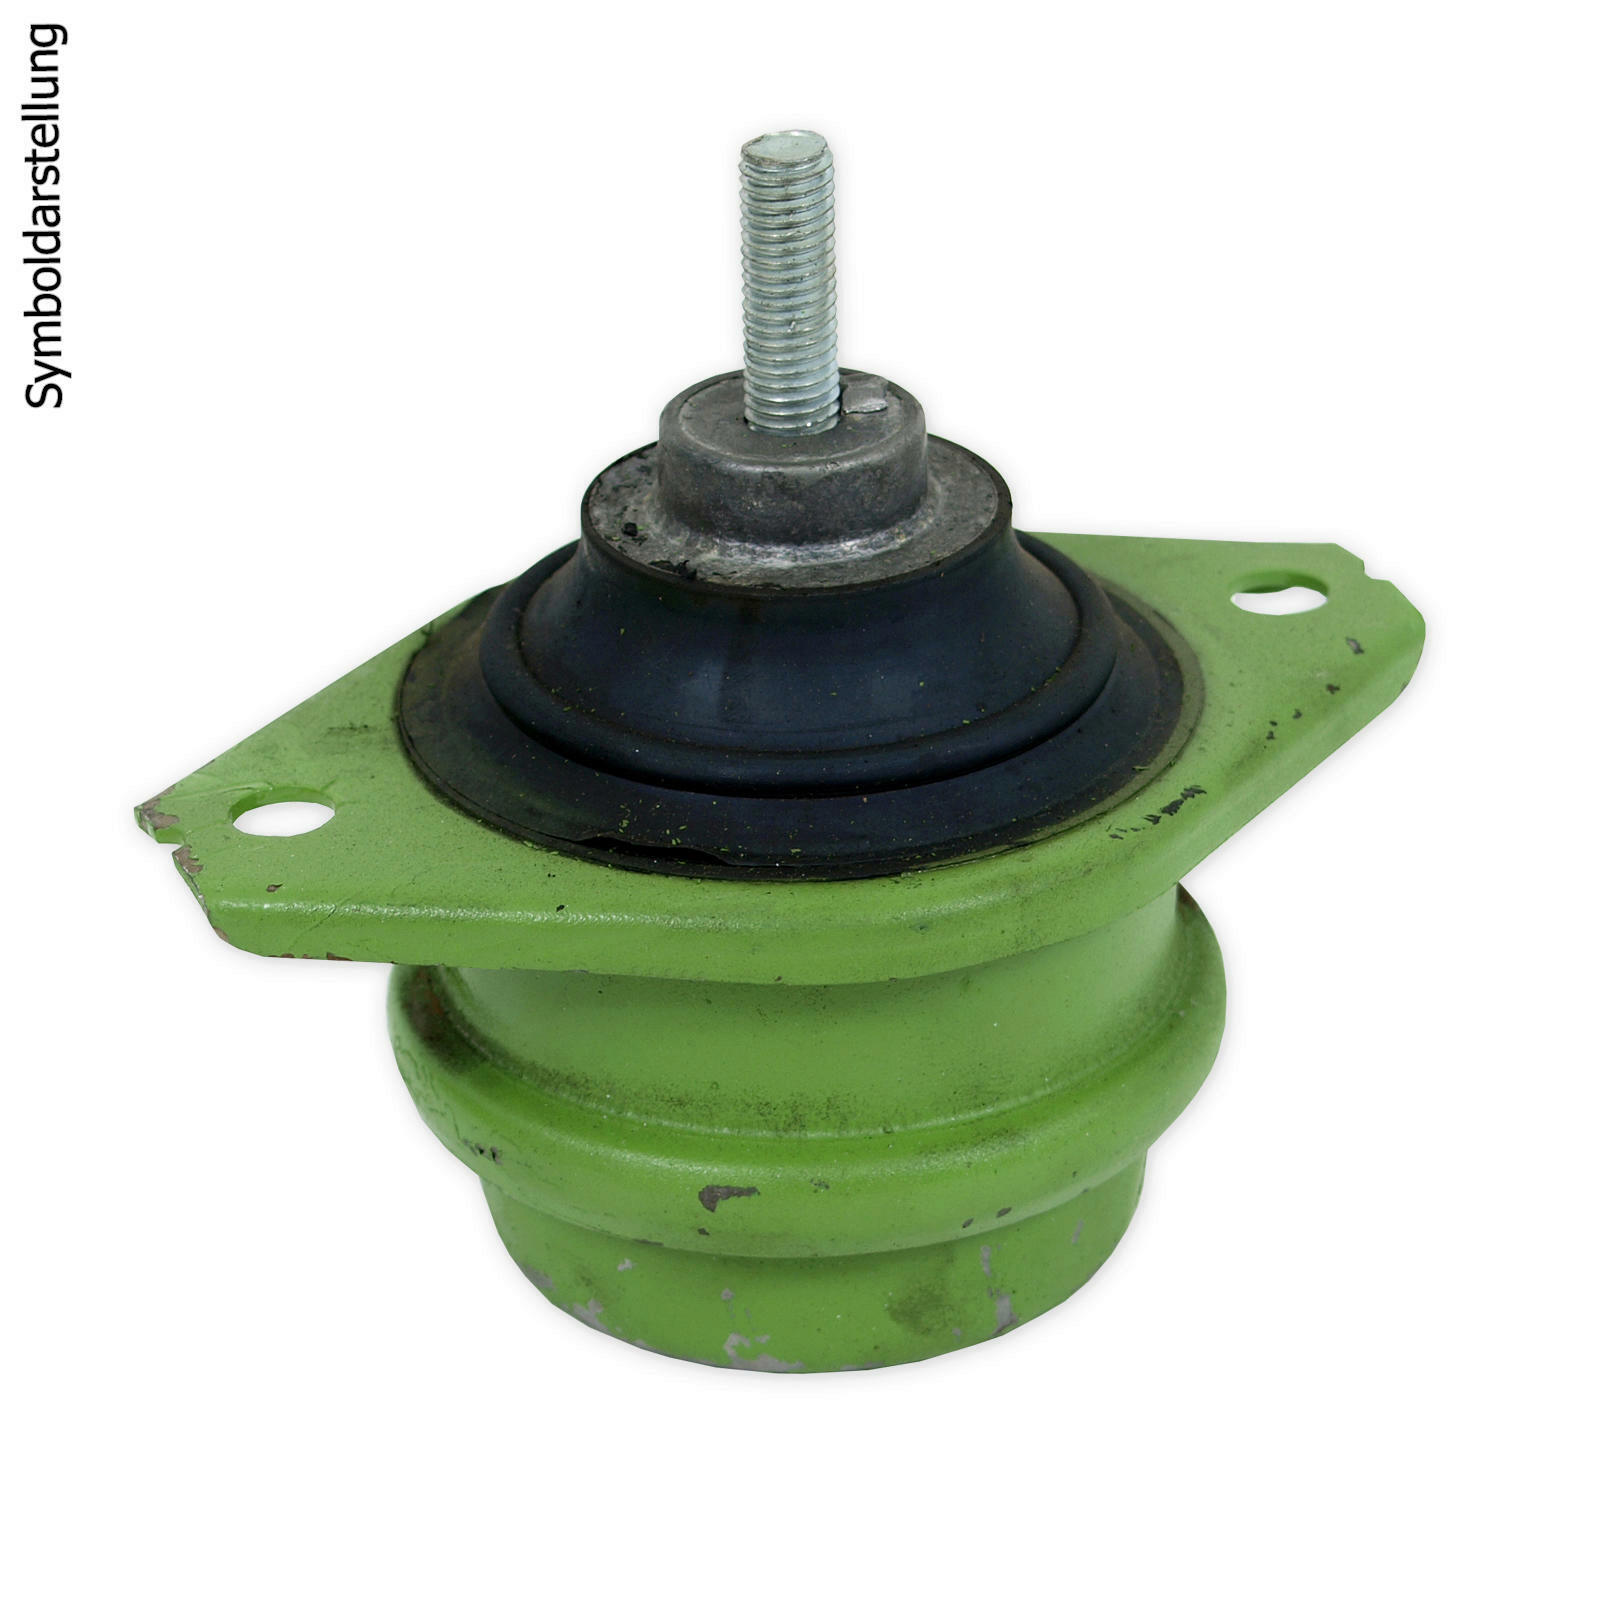 METZGER Mounting, automatic transmission